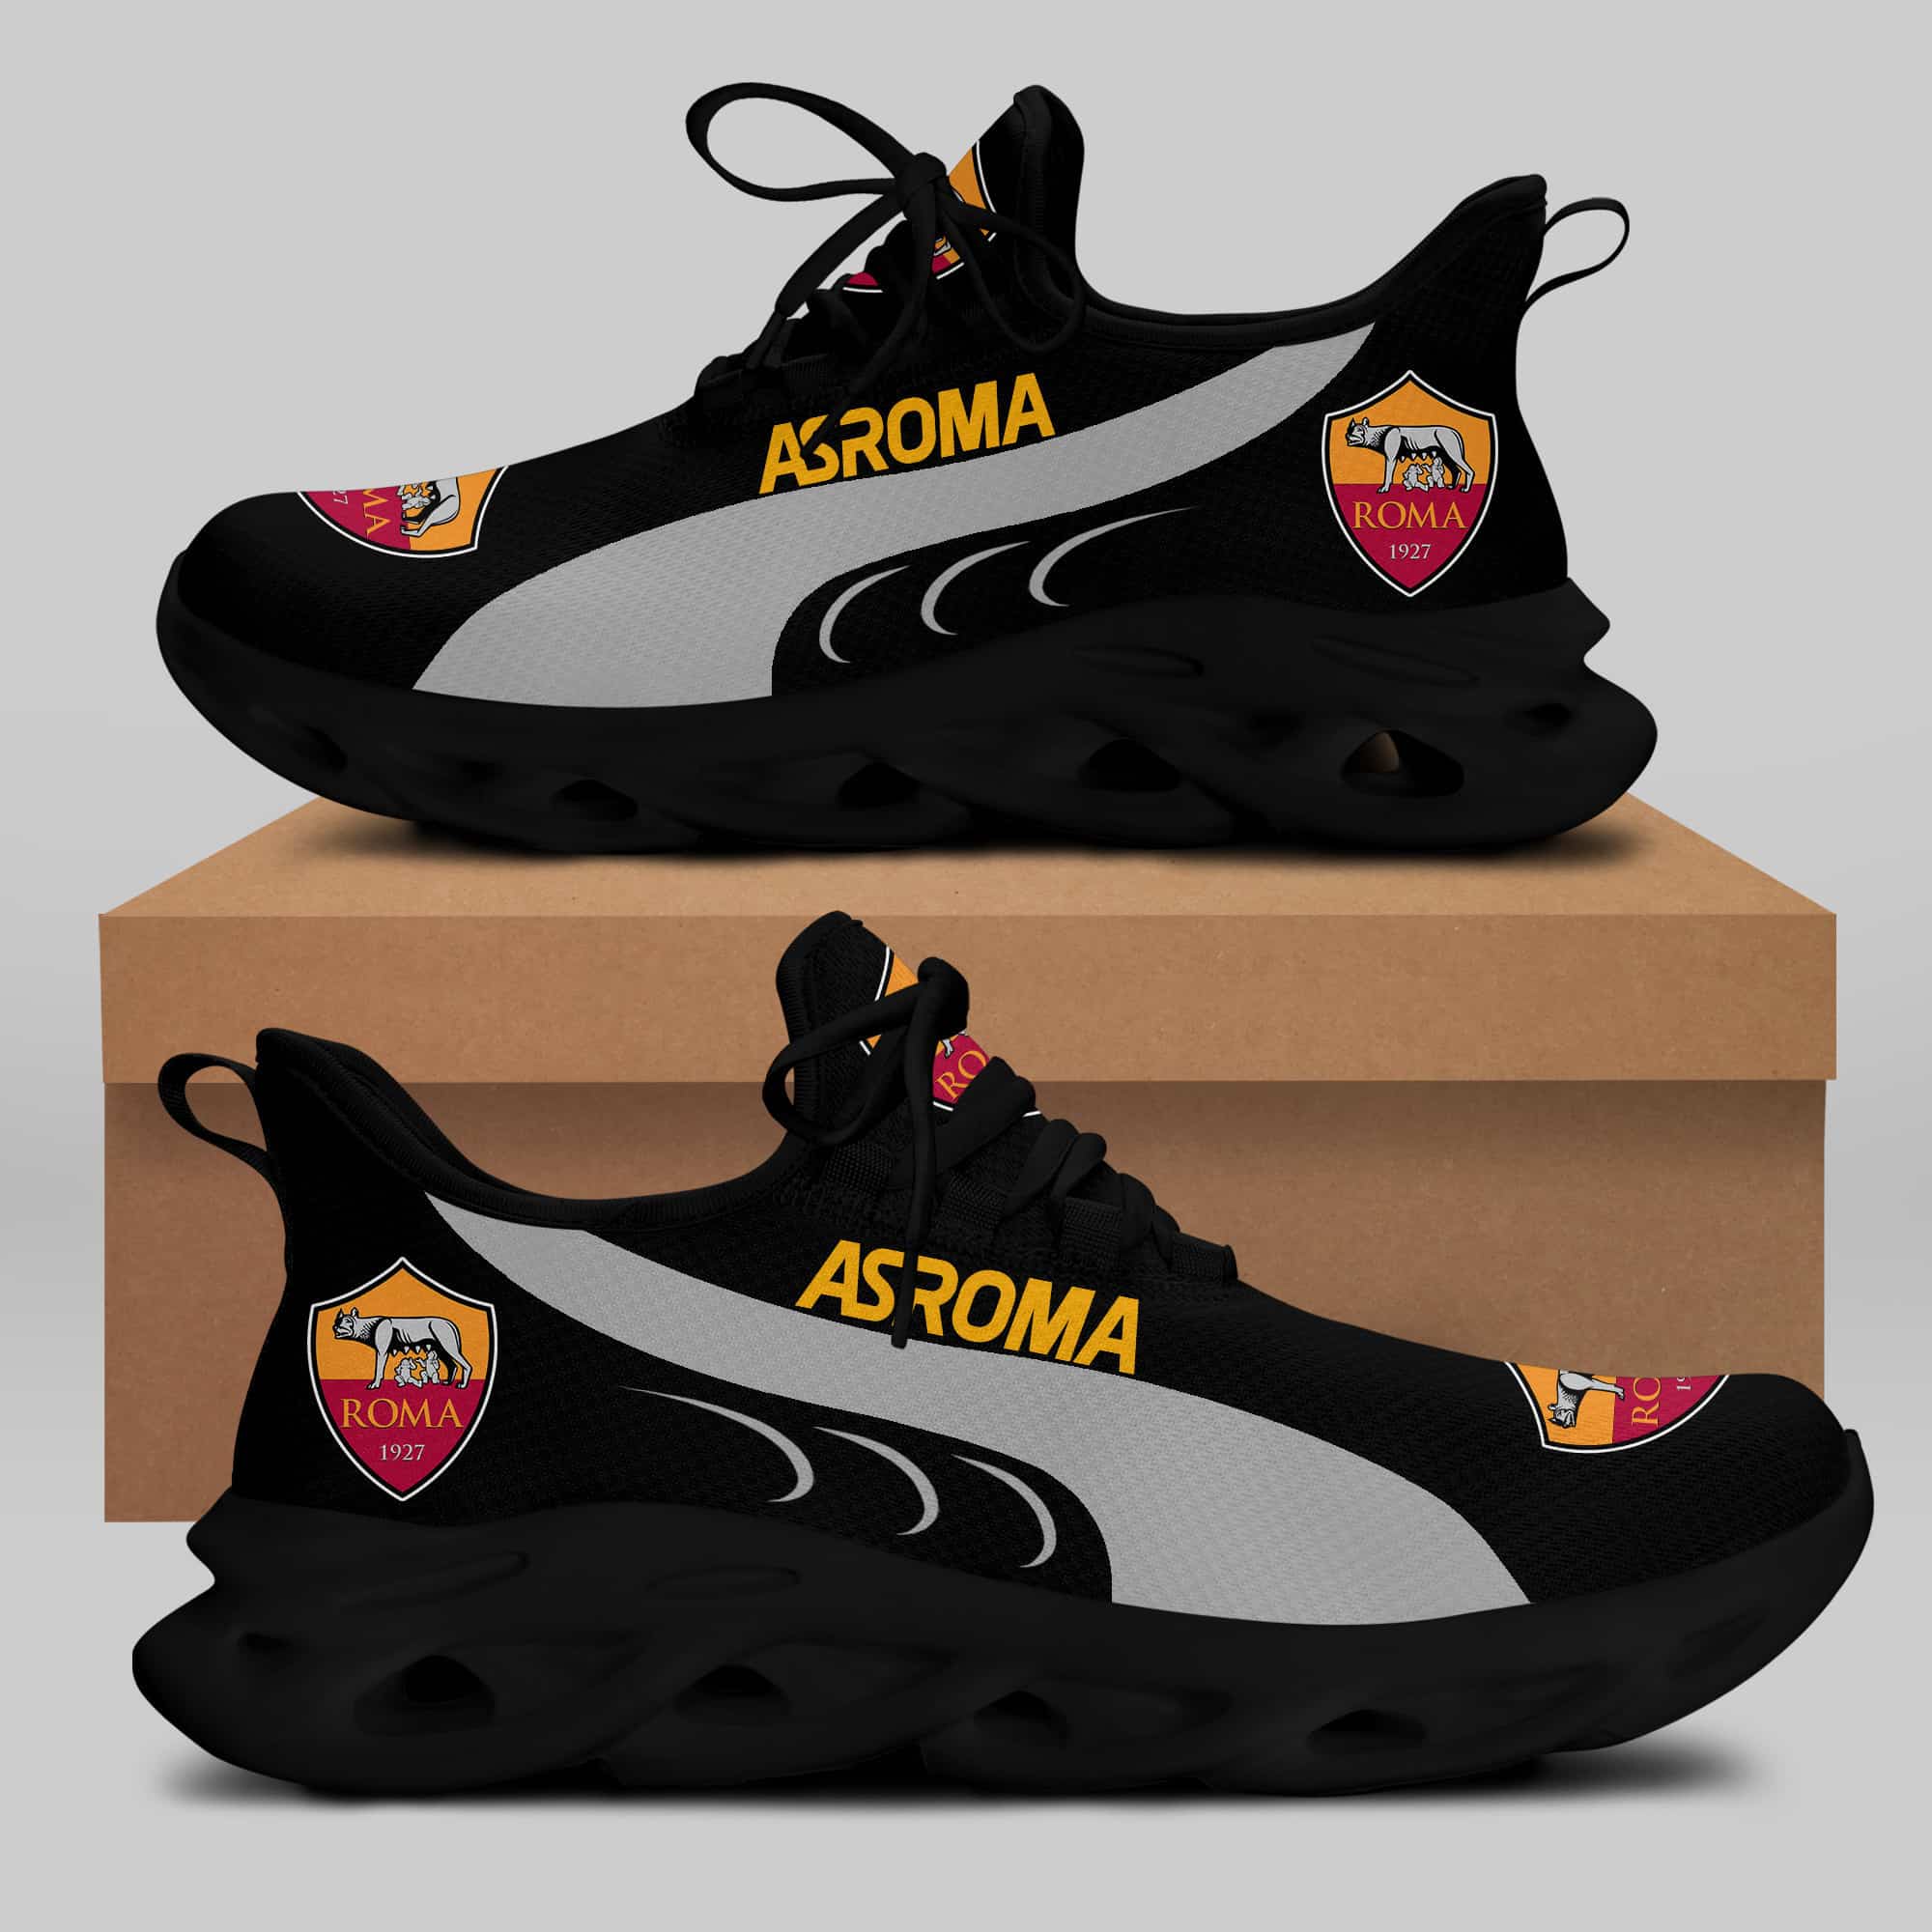 As Roma Running Shoes Max Soul Shoes Sneakers Ver 20 1